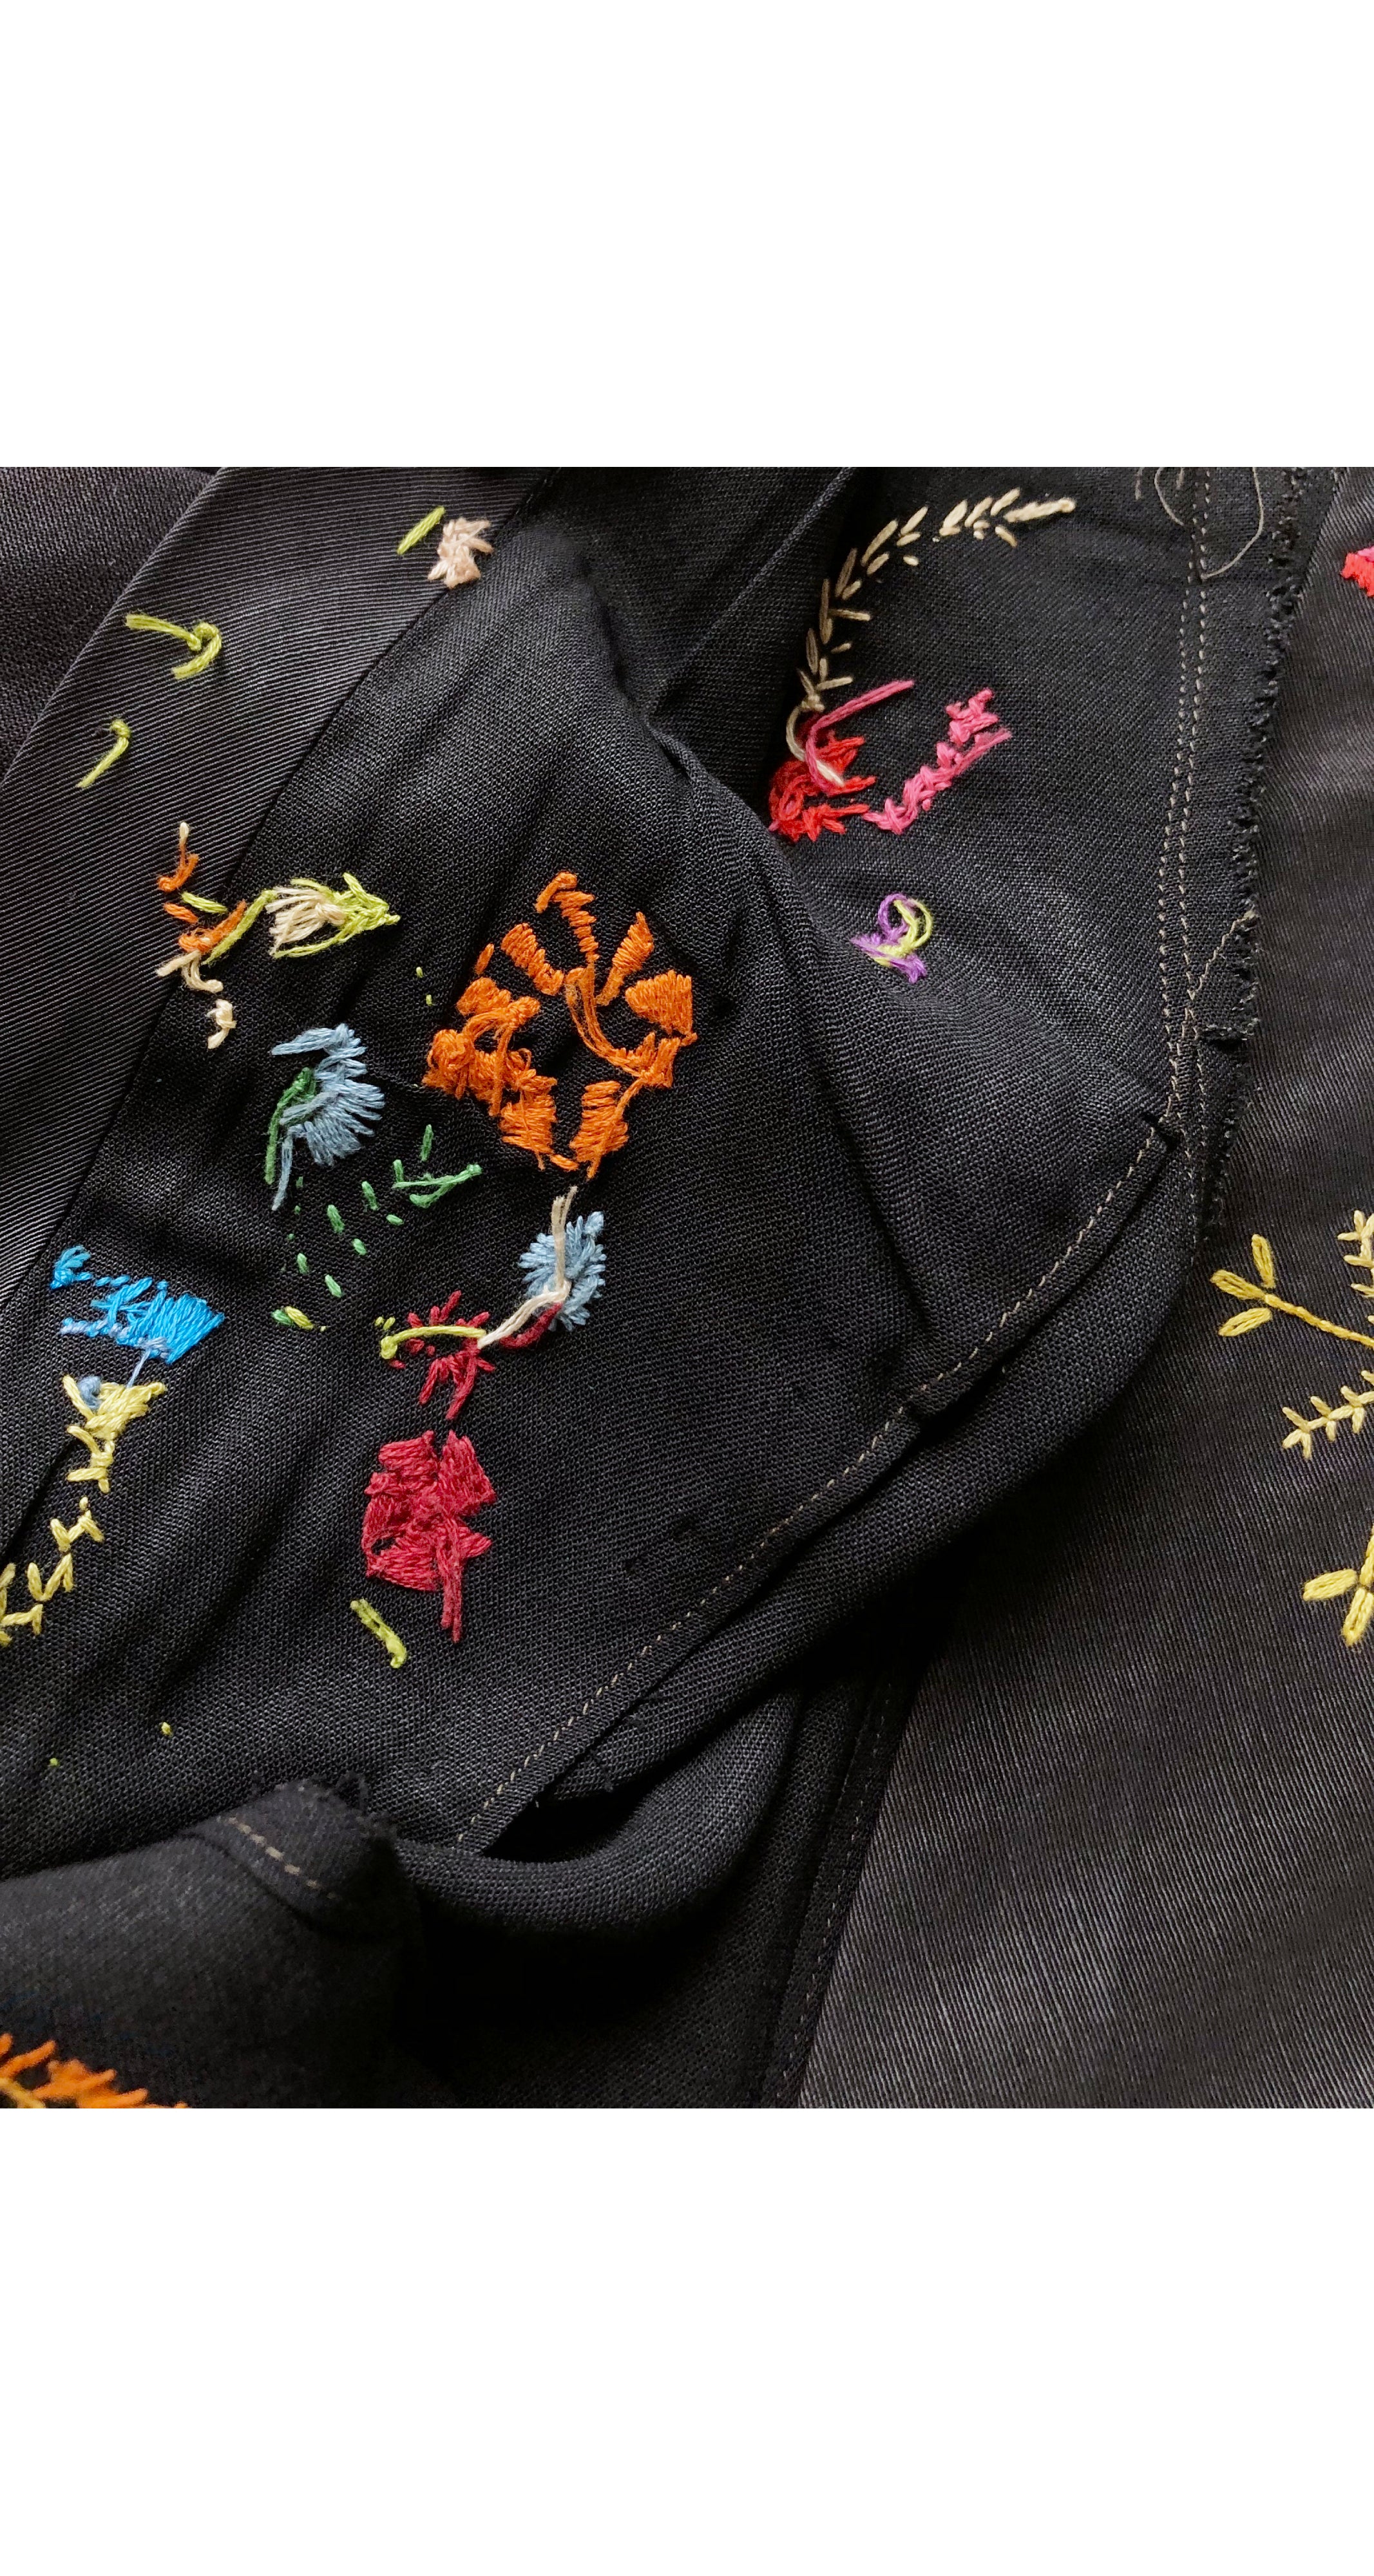 1930s Floral Hand-Embroidered Black Rayon Jacket